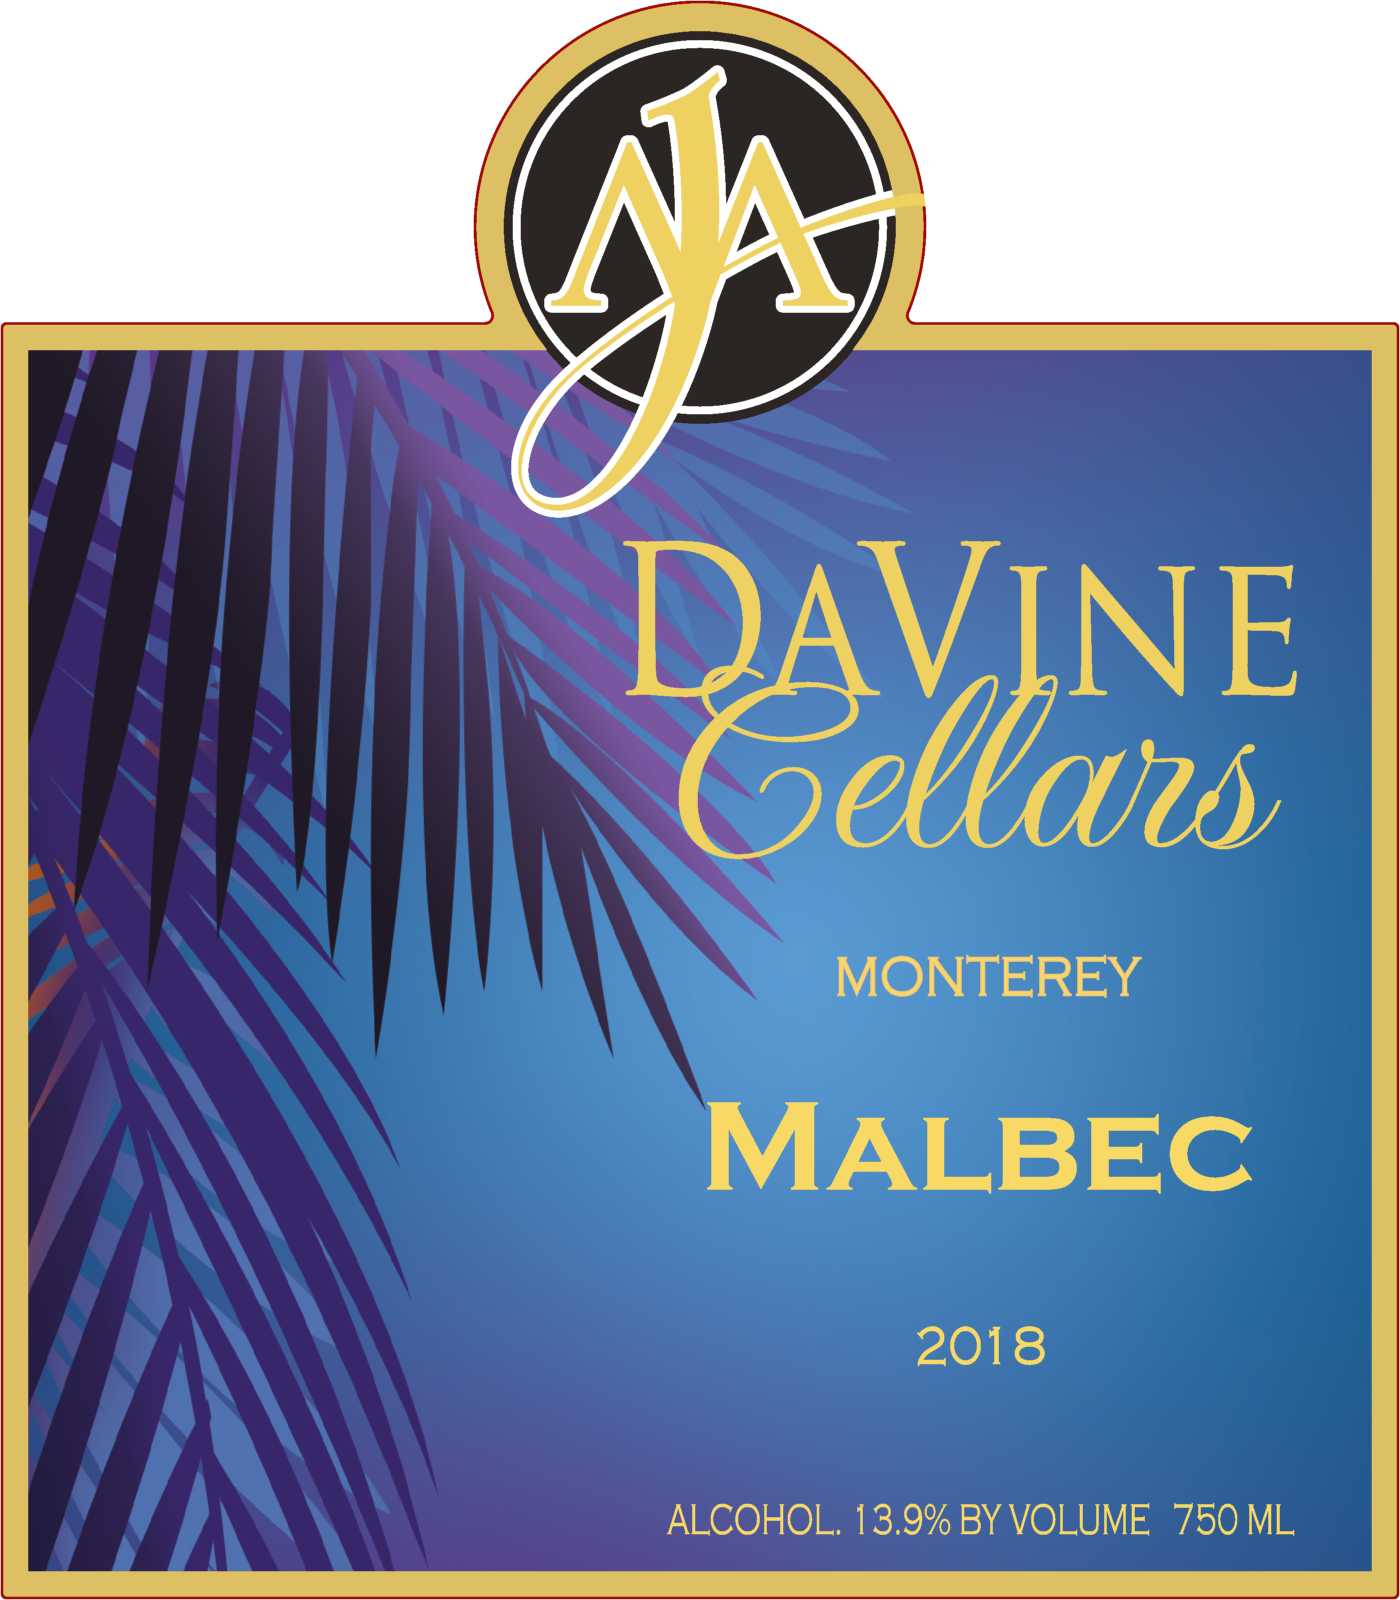 Product Image for 2018 Monterey Malbec "Sneaky"